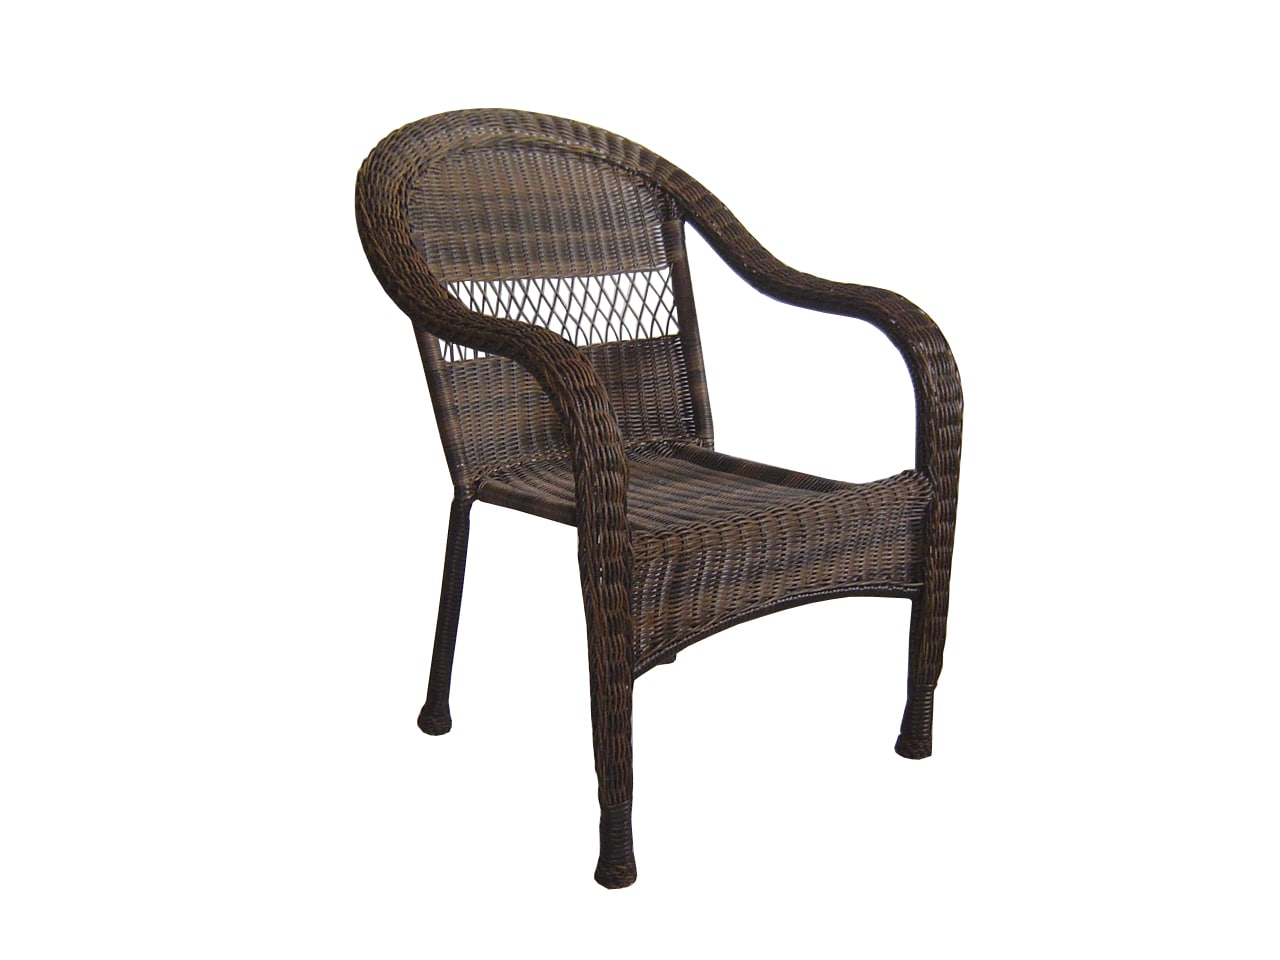 Patio Chairs Department At, Garden Treasures Stackable Steel Dining Chair With Mesh Seat